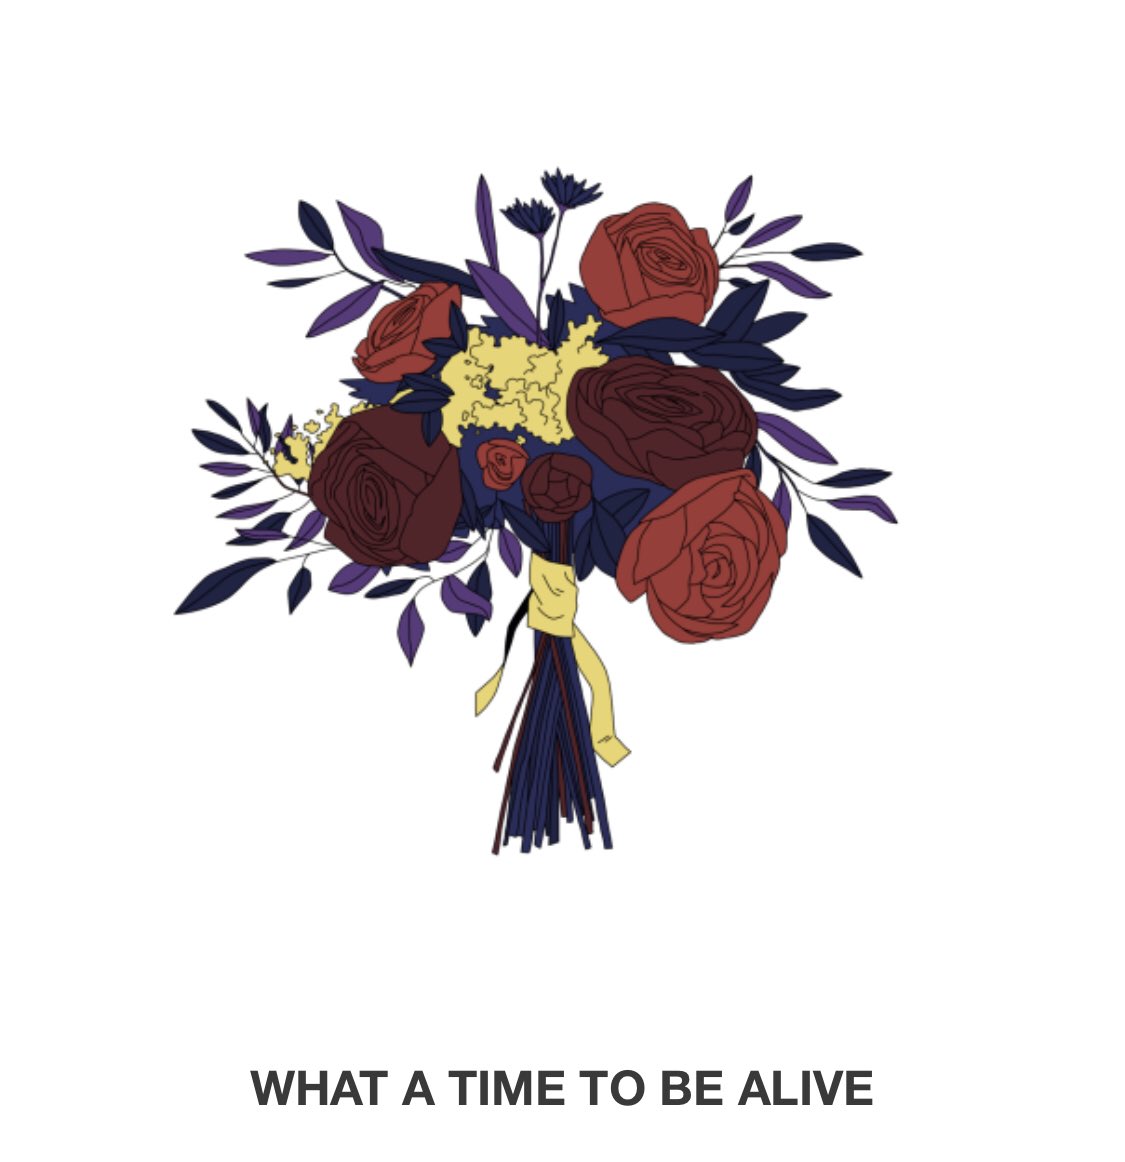 Bouquet: What A Time To Be AliveSong represents: TBALyric: “There’s a golden lining up in every single cloud”Nothing about this track was confirmed yet.